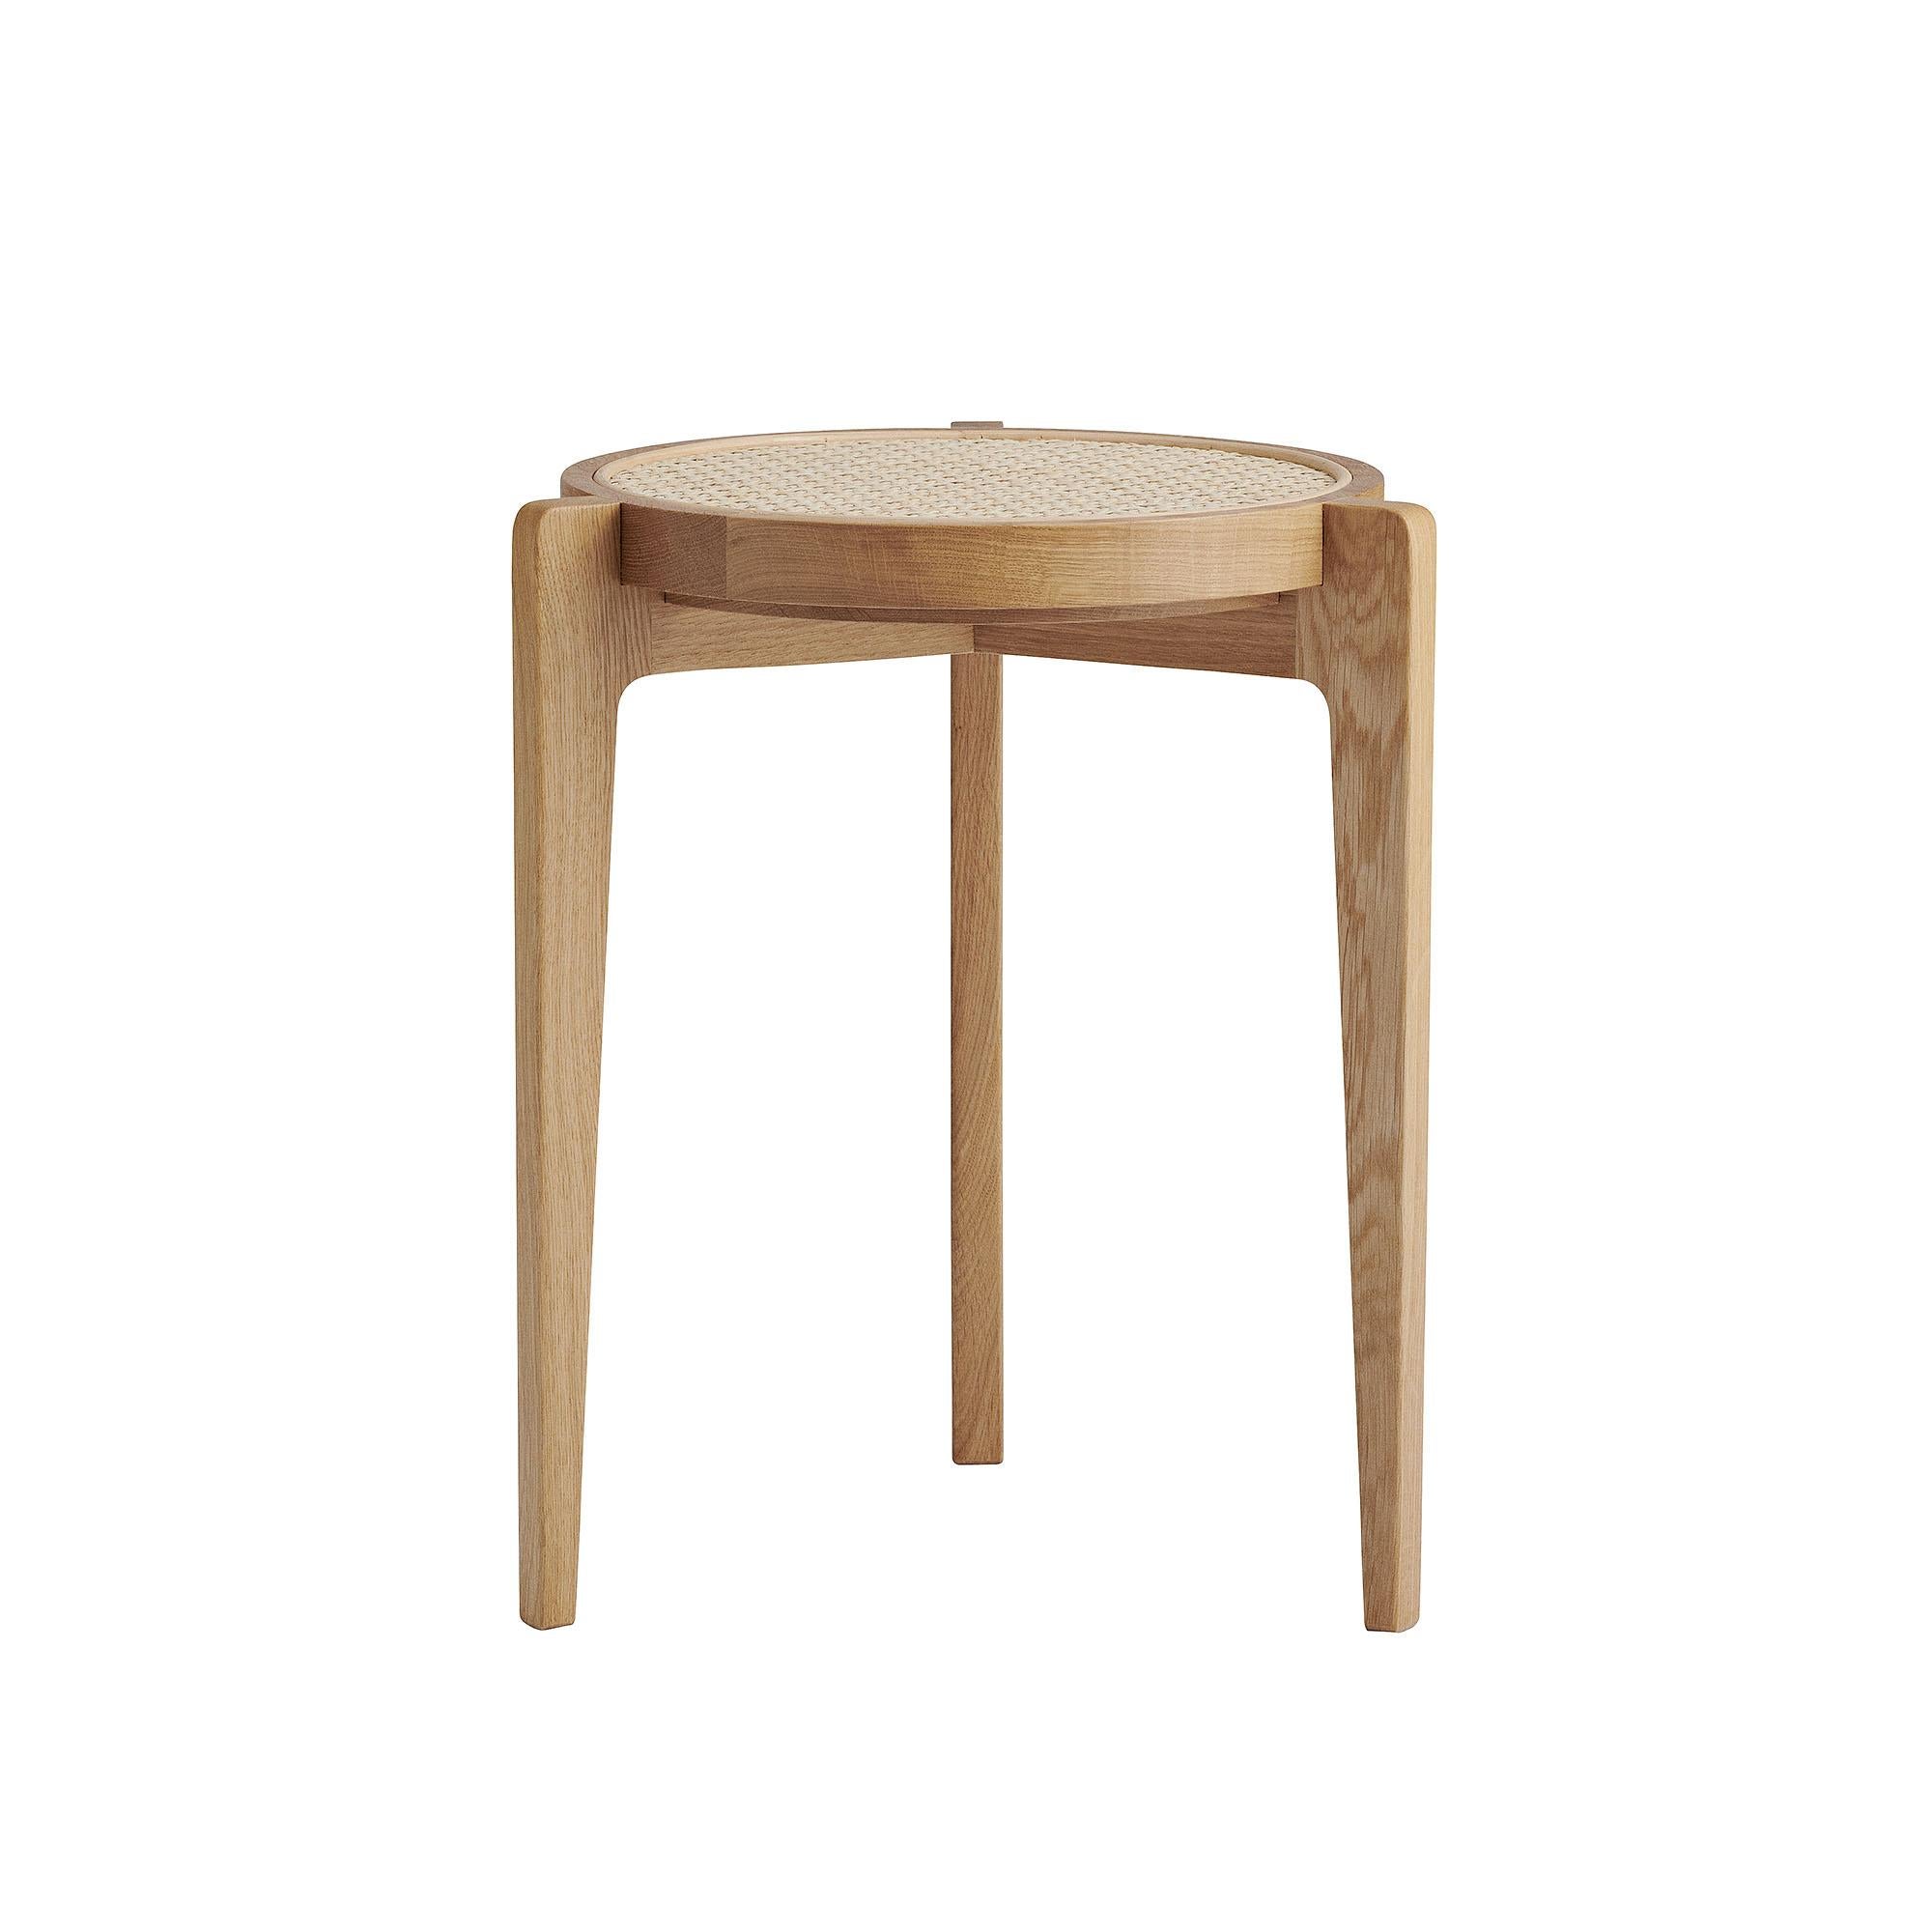 'Le Roi' Stool by Norr11

Dimensions :
Diameter: 36 cm
Height: 44 cm

Model shown on the picture:
Color: natural oak
Natural French Rattan

---
The Le Roi Coffee Table is constructed as a frame geometry of solid oak, with
inlaid natural French